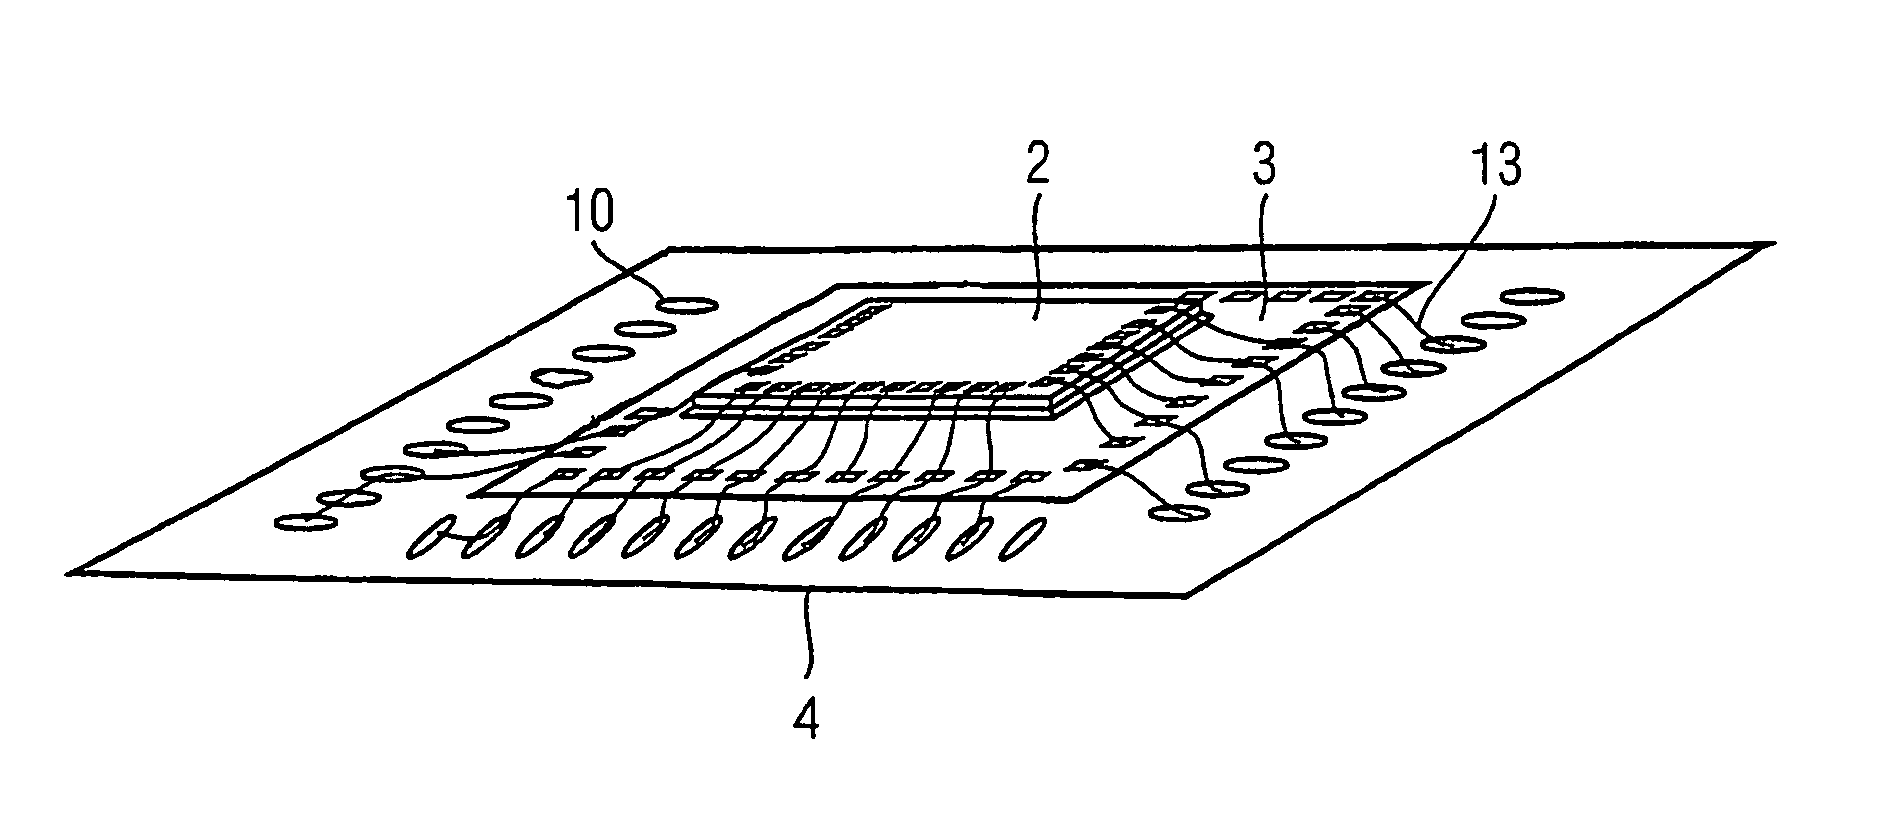 Method for connecting a die assembly to a substrate in an integrated circuit and a semiconductor device comprising a die assembly